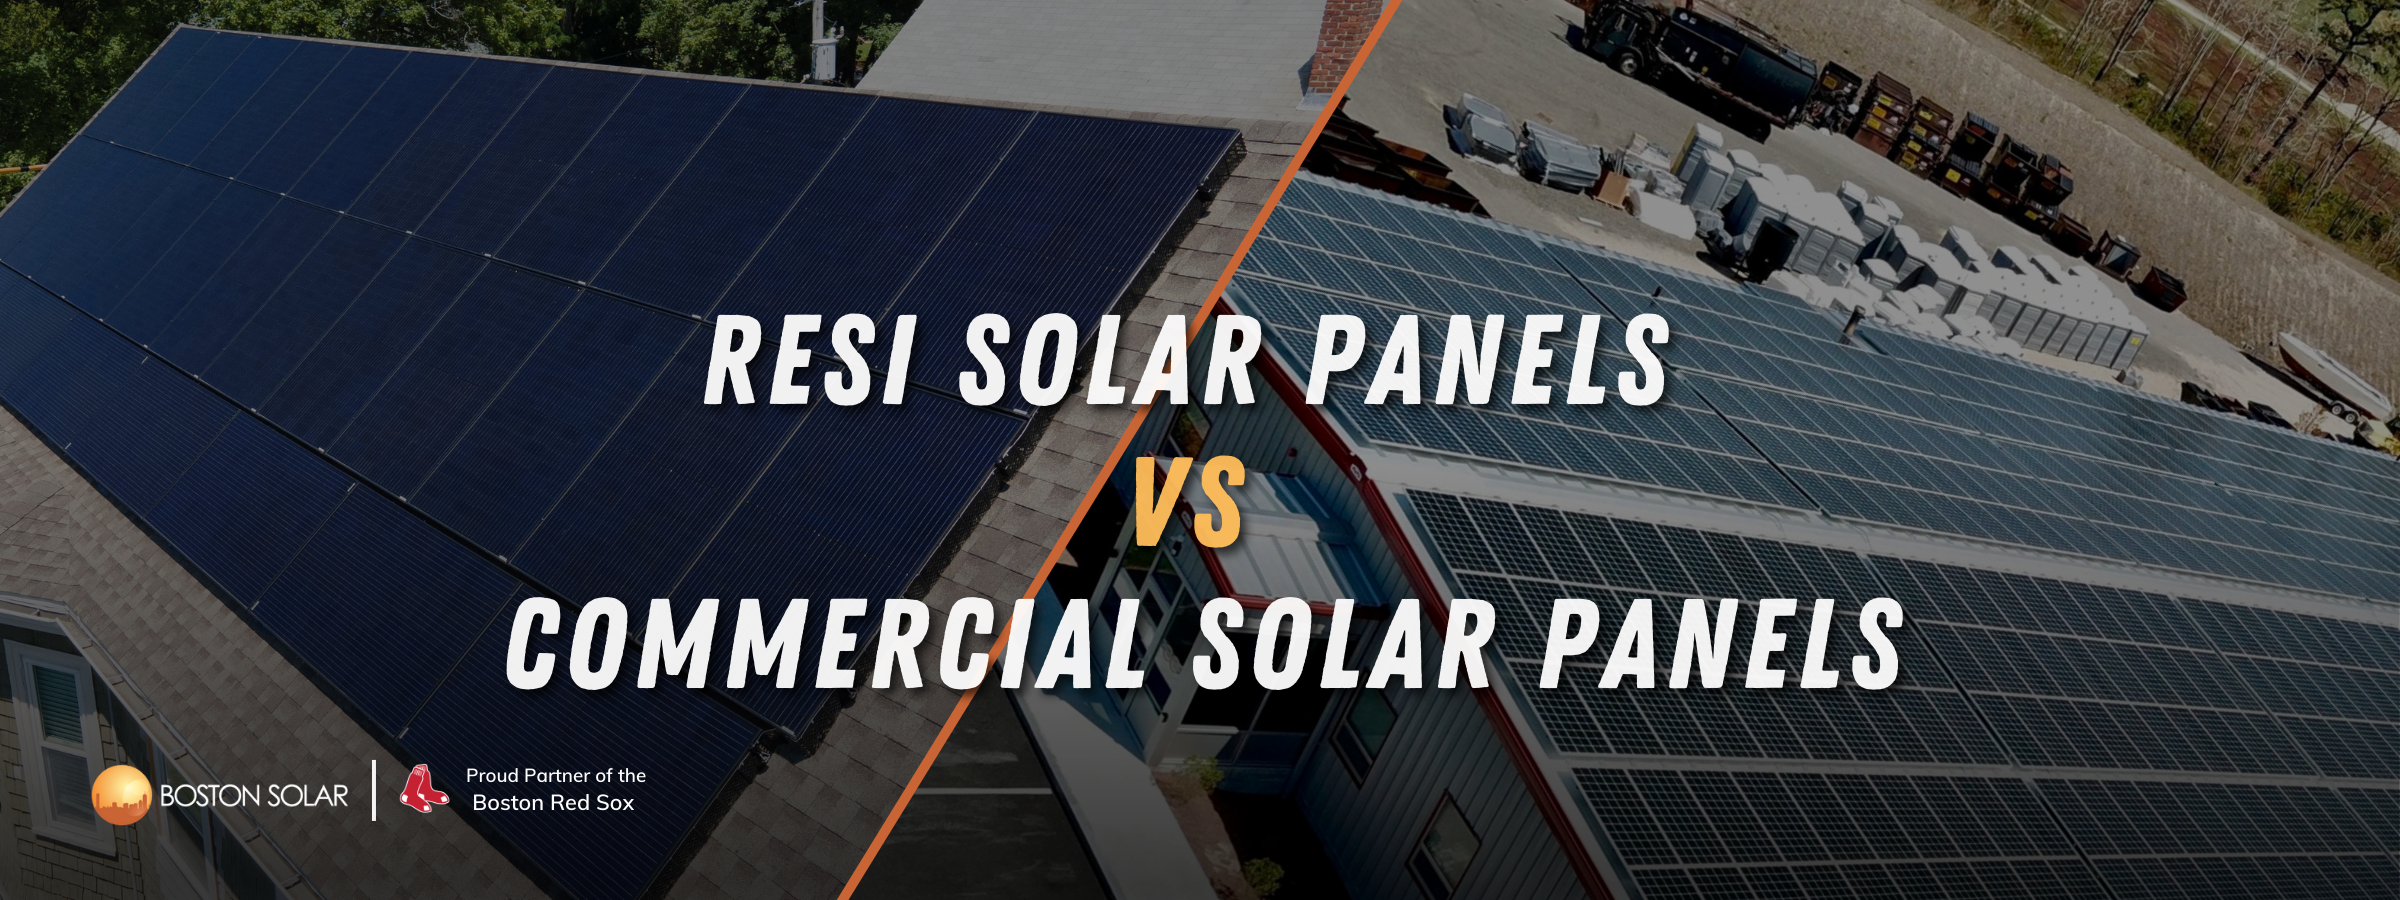 Key Differences Between Commercial & Residential Solar Panels